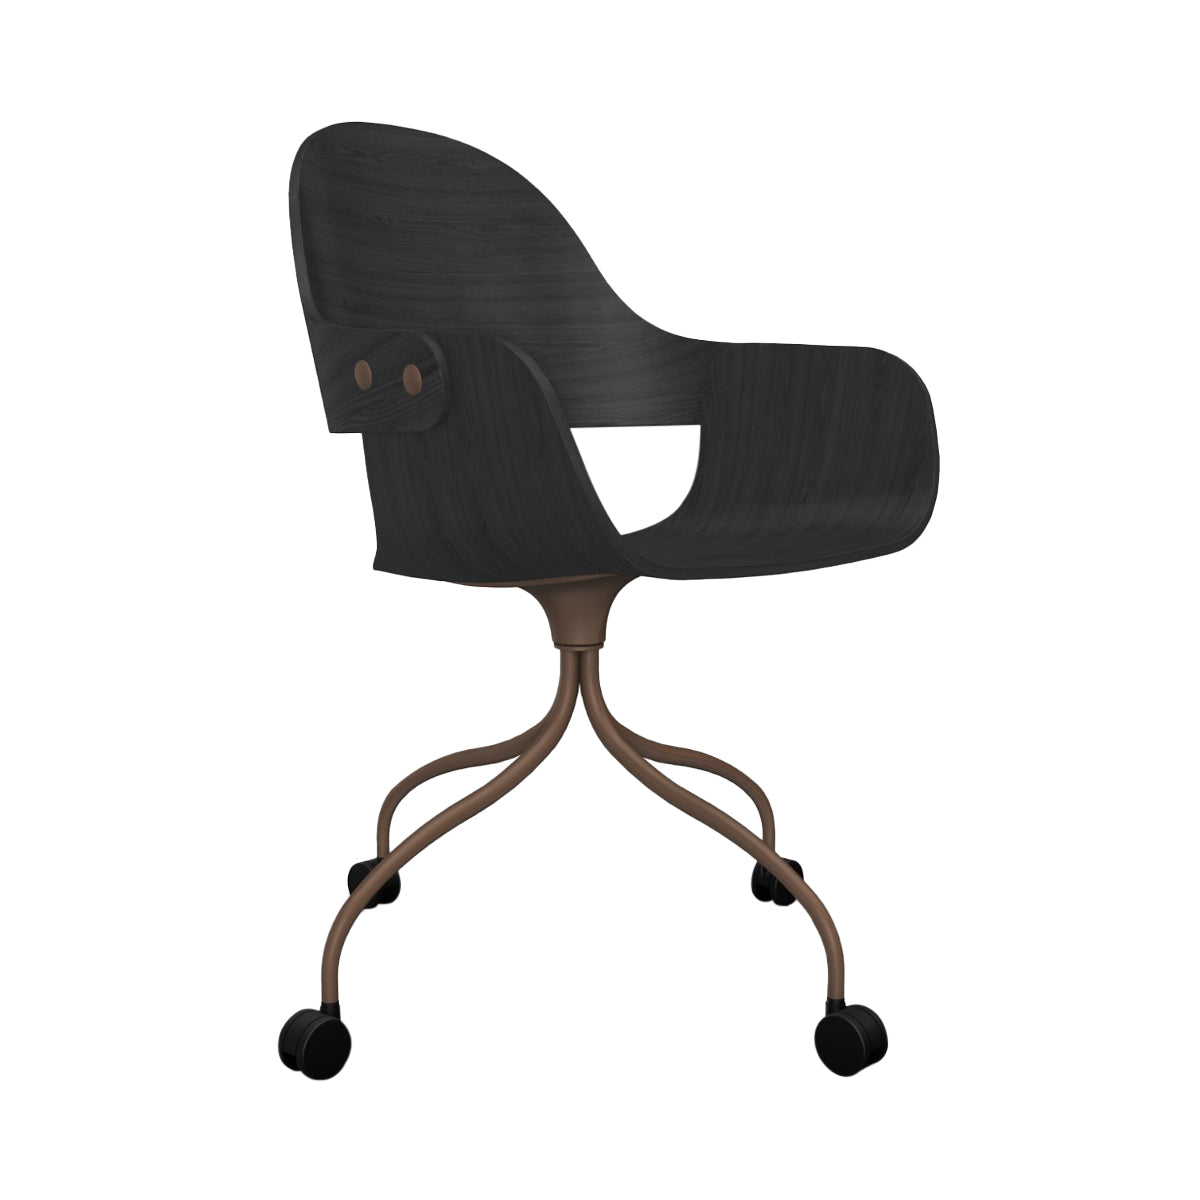 Showtime Nude Chair with Wheel: Ash Stained Black + Pale Brown